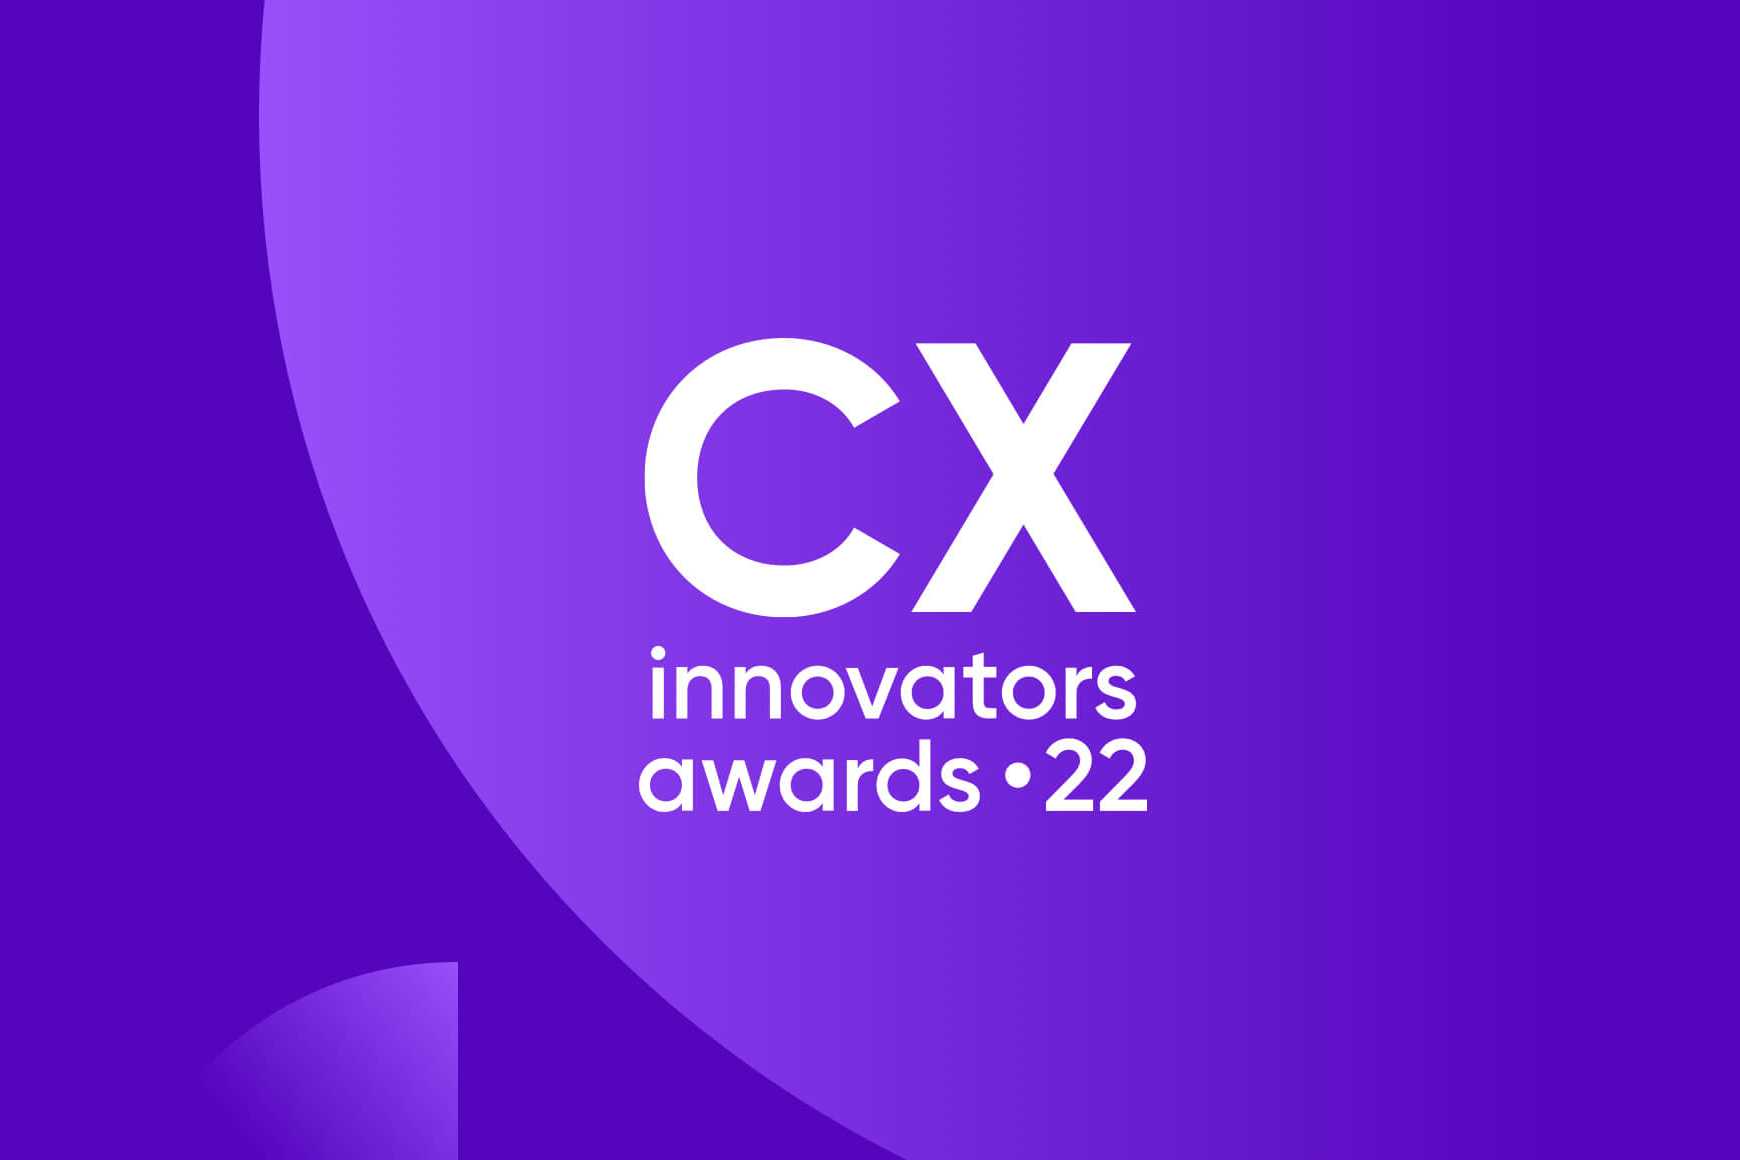 Learn how CX innovators are finding a better way to put customers first.